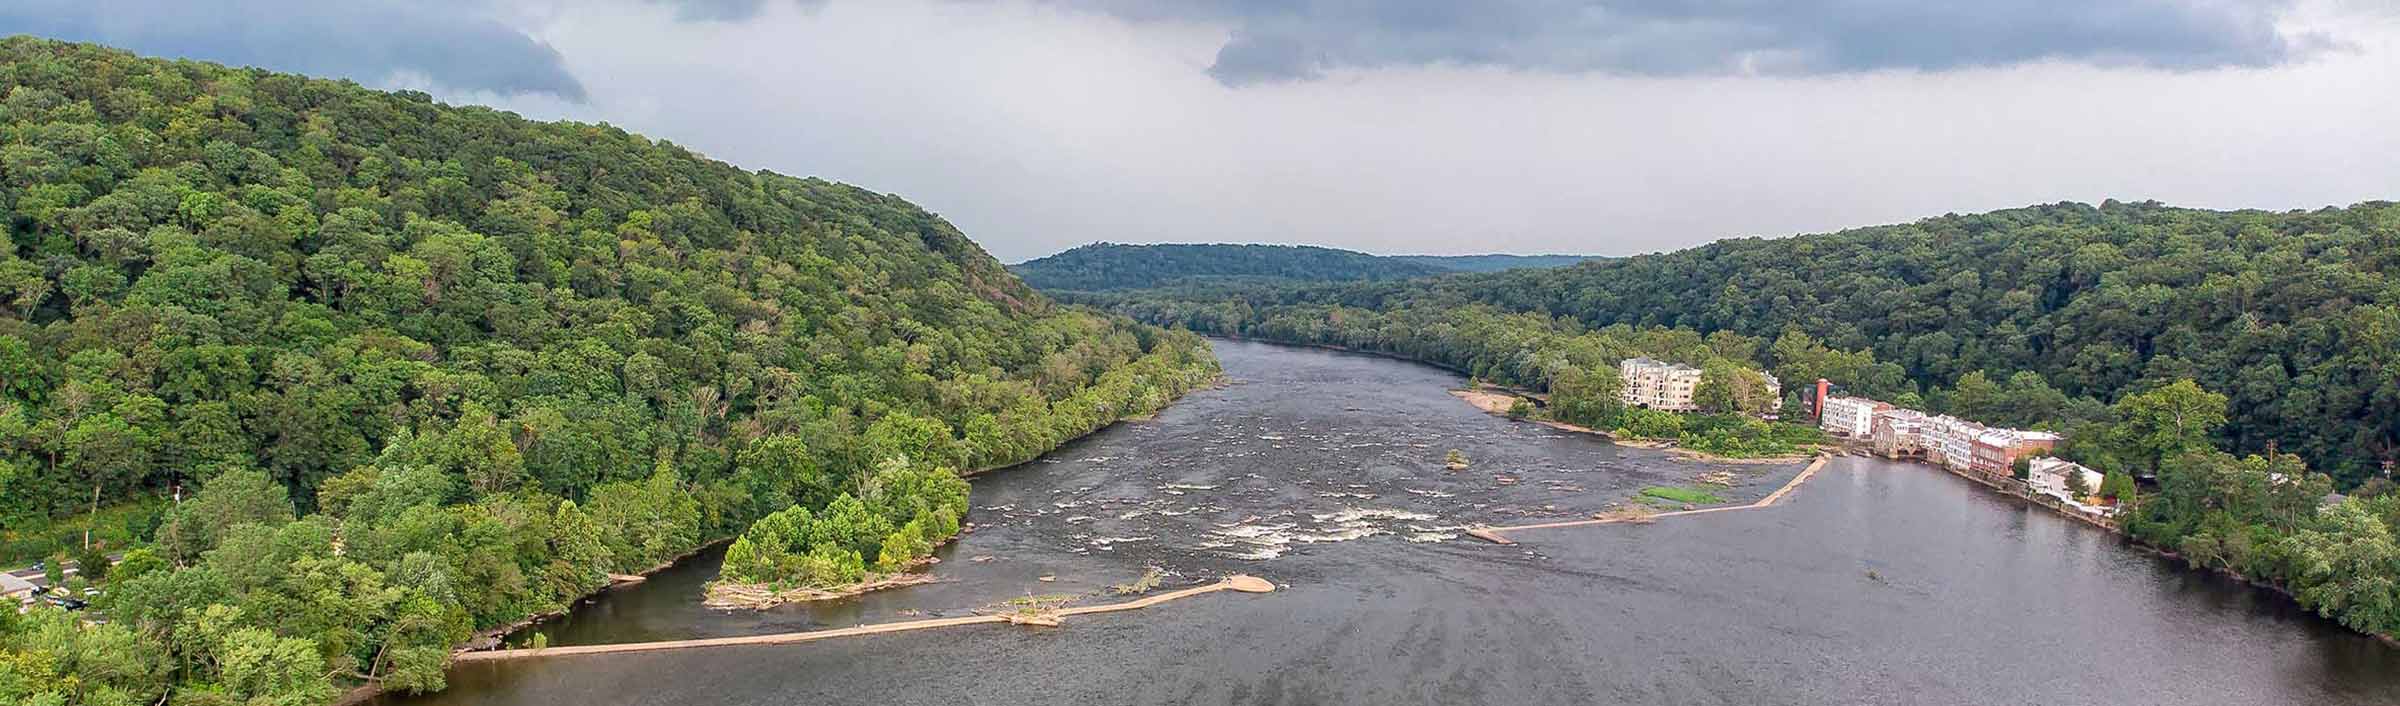 The Delaware river in the United States